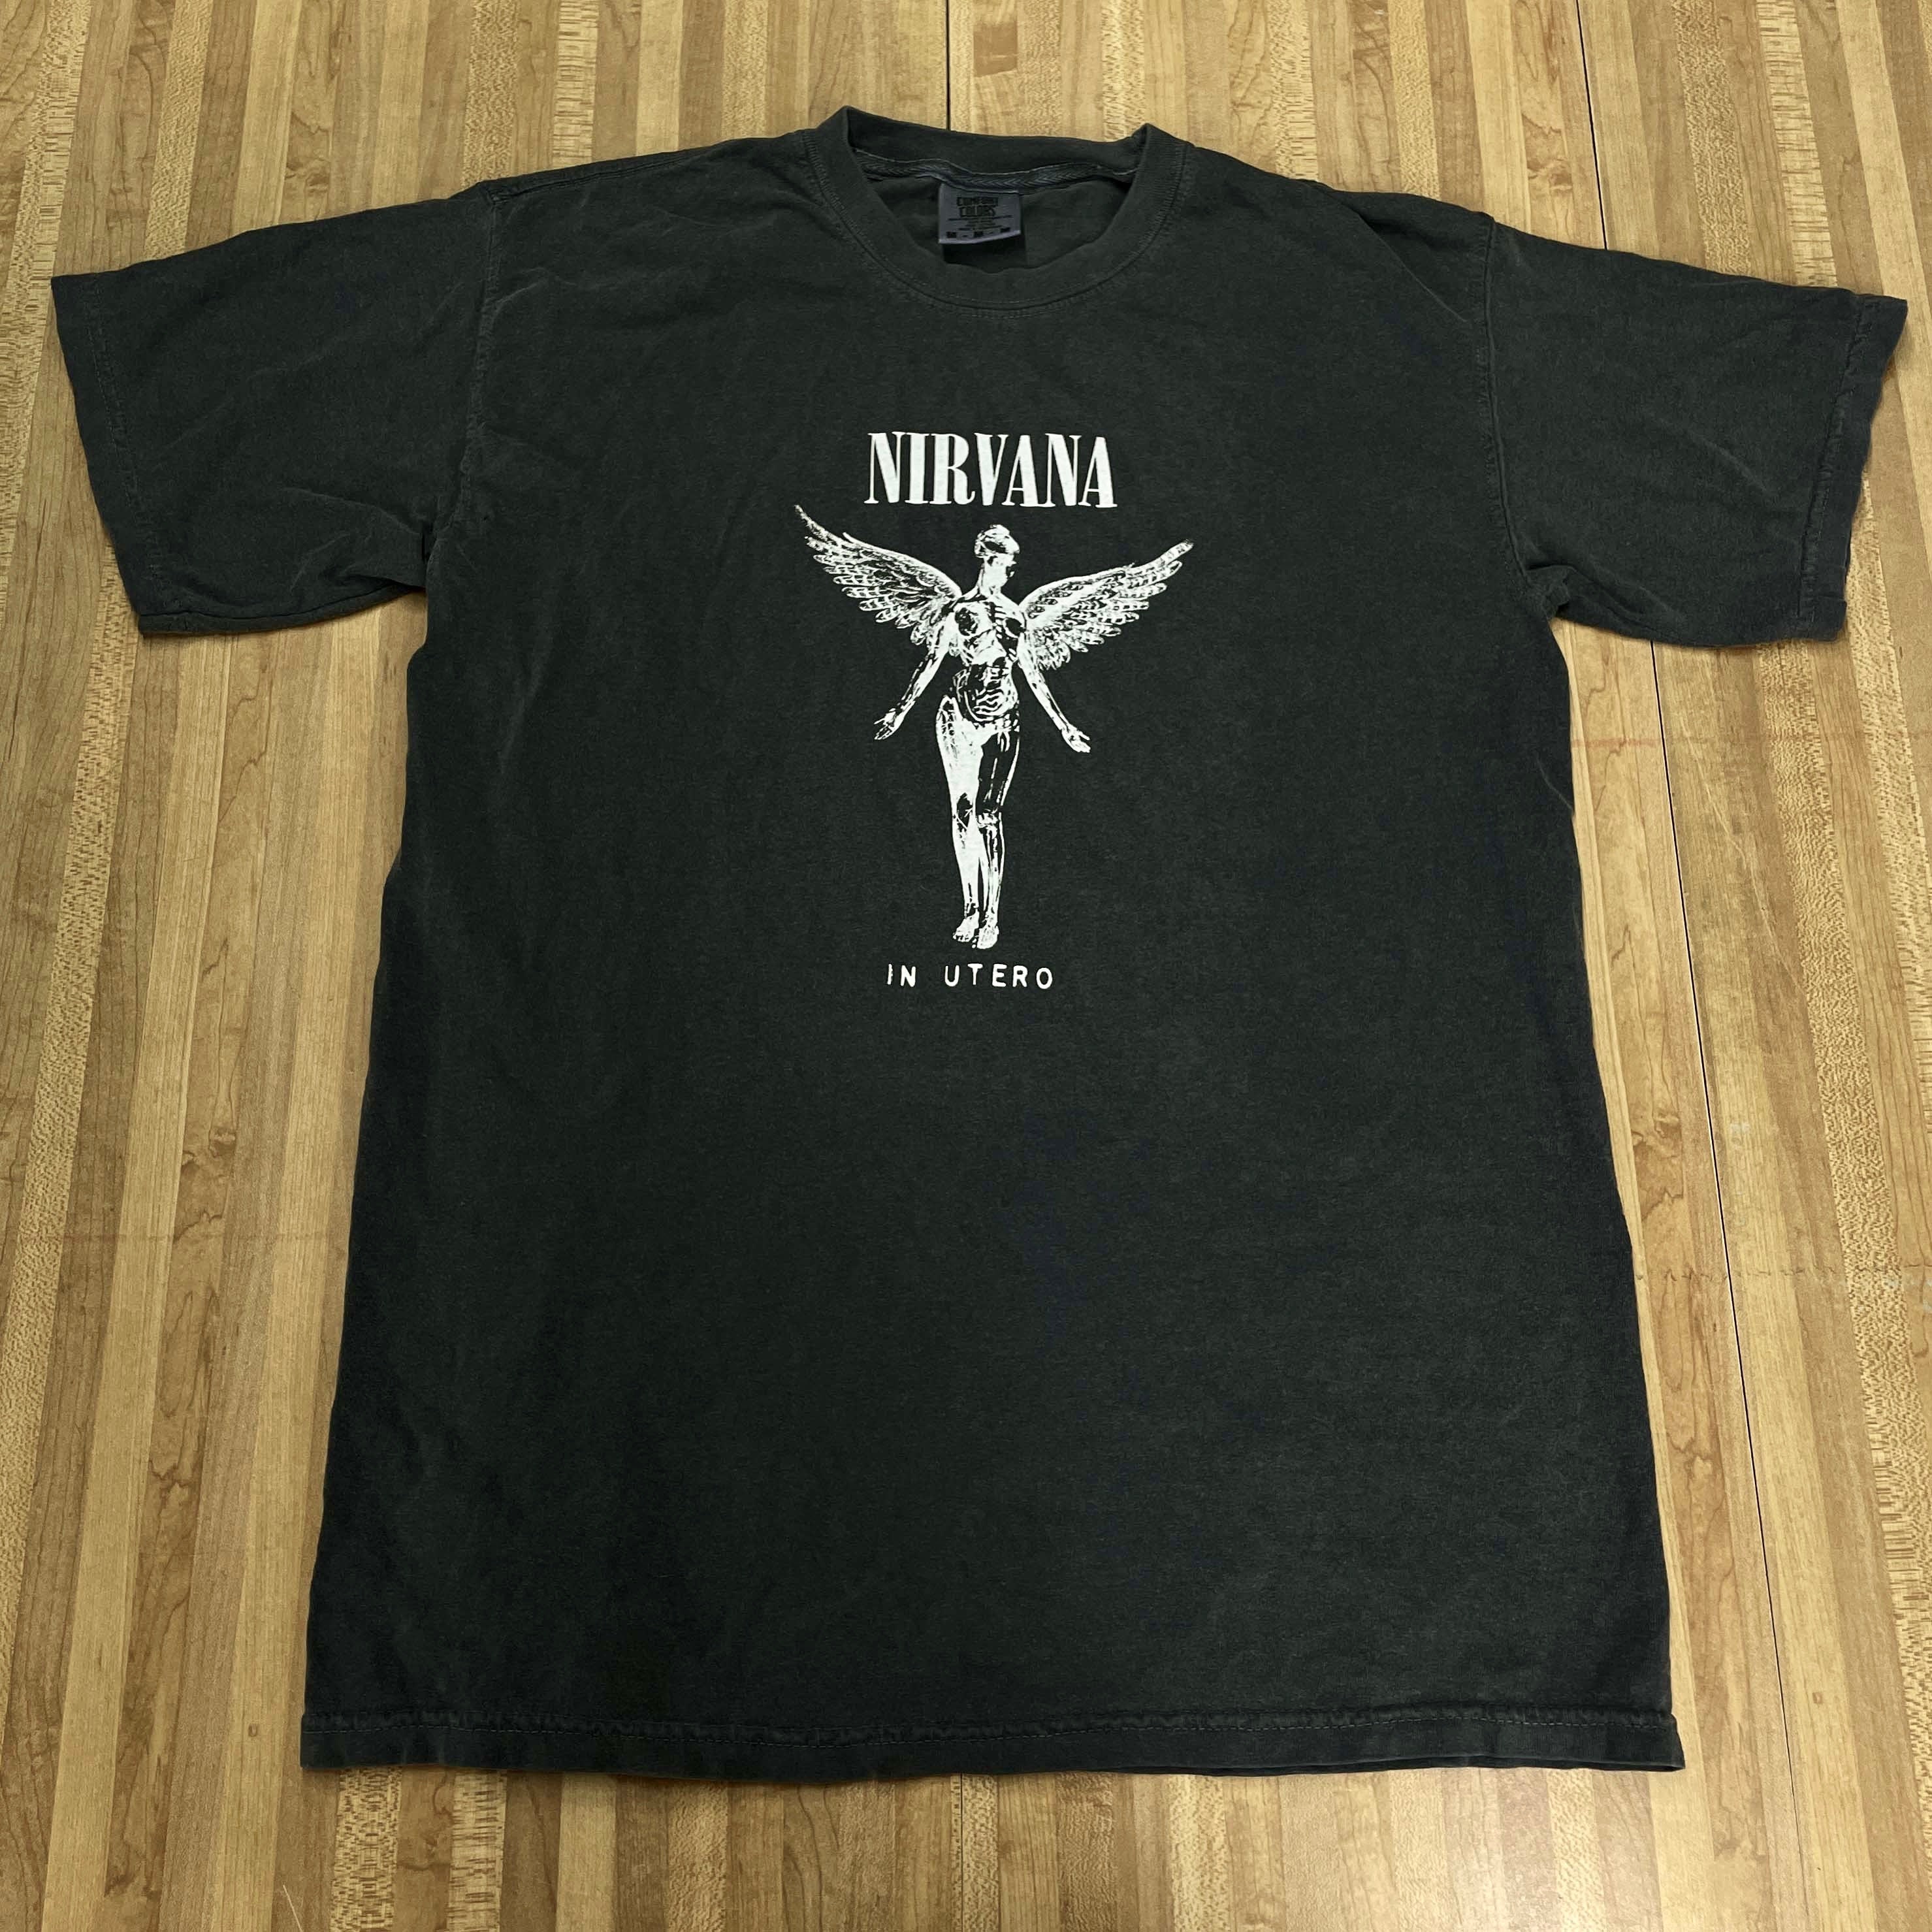 Discover Nirvana Band Lustig In Utero Washed Black T-Shirt